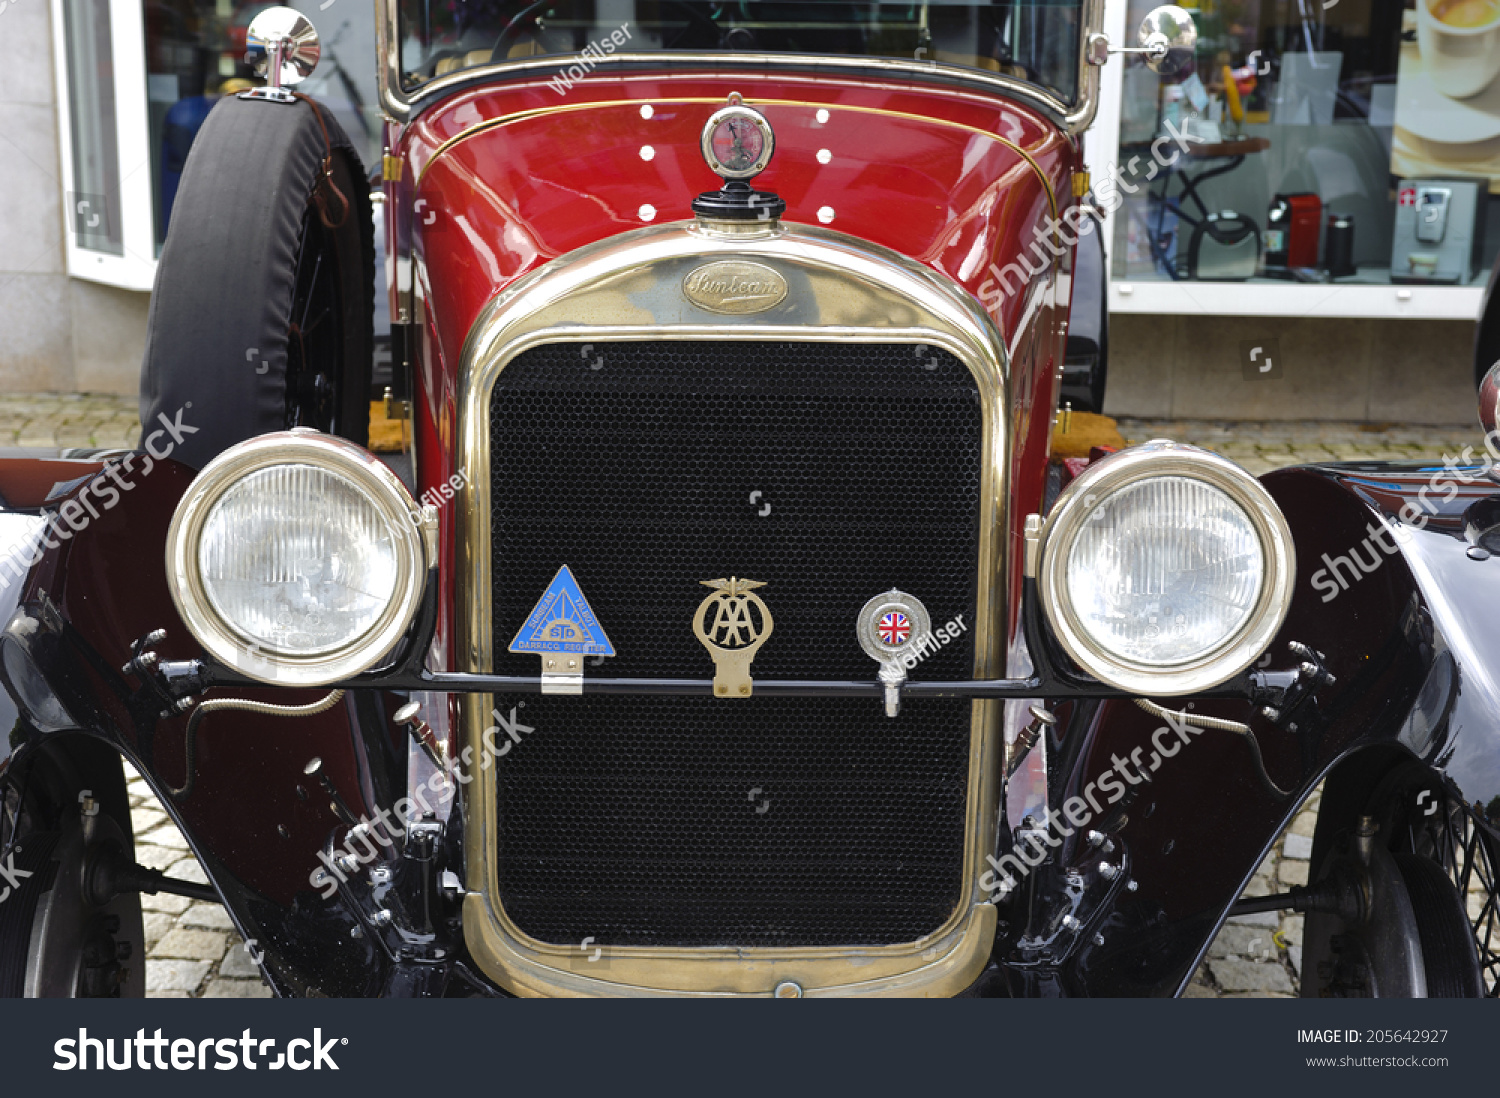 LANDSBERG, GERMANY - JULY 12, 2014: Public oldtimer rally in Bavarian city Landsberg for at least 80 years old veteran cars with a front view of Sunbeam 25 HP, built at year 1926 #205642927